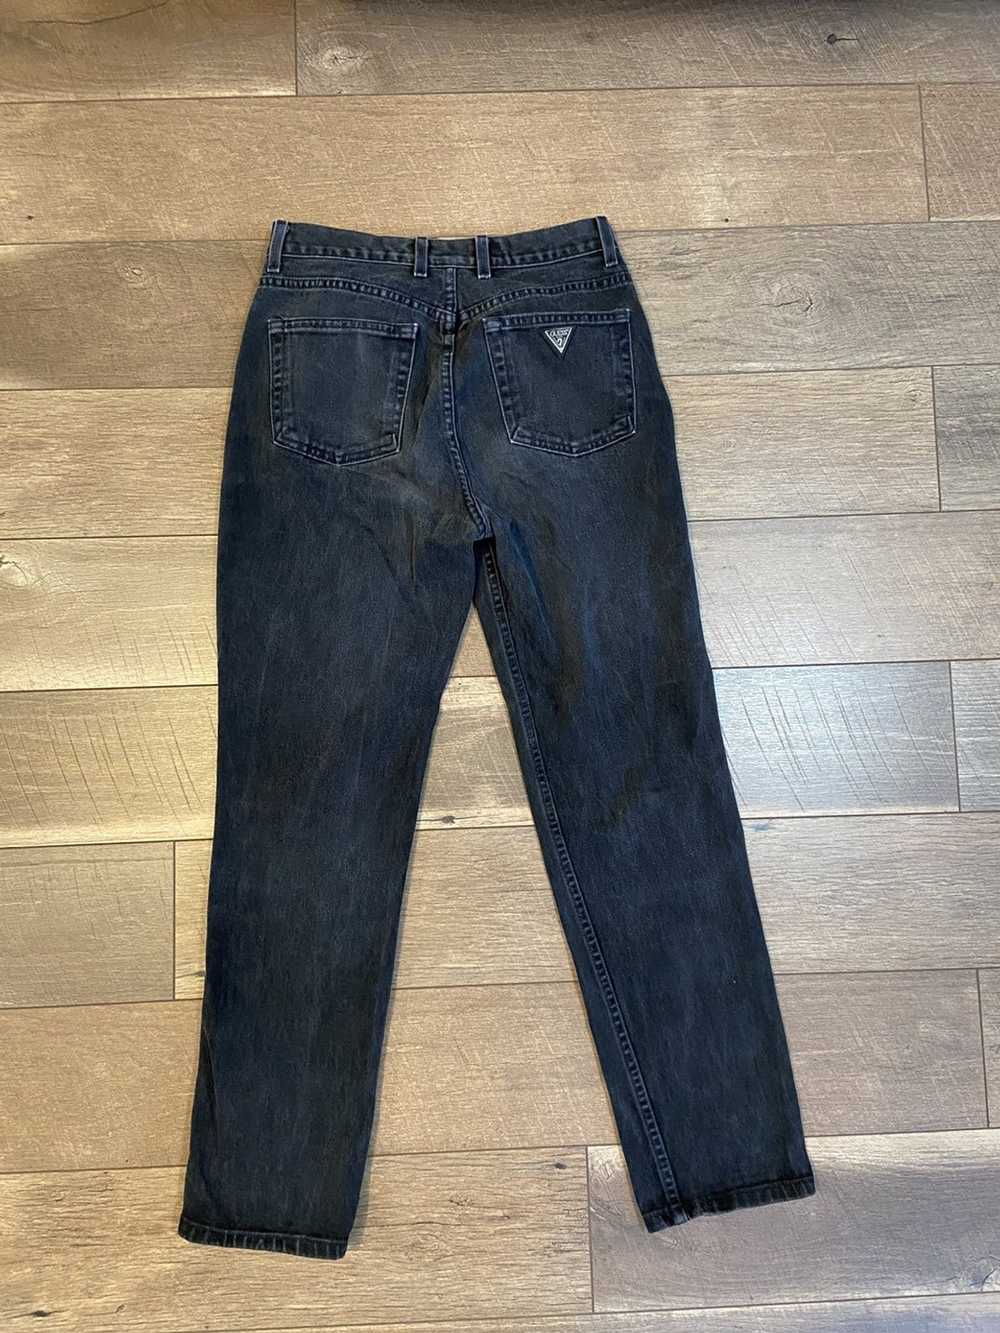 Guess Vintage Guess jeans - image 2